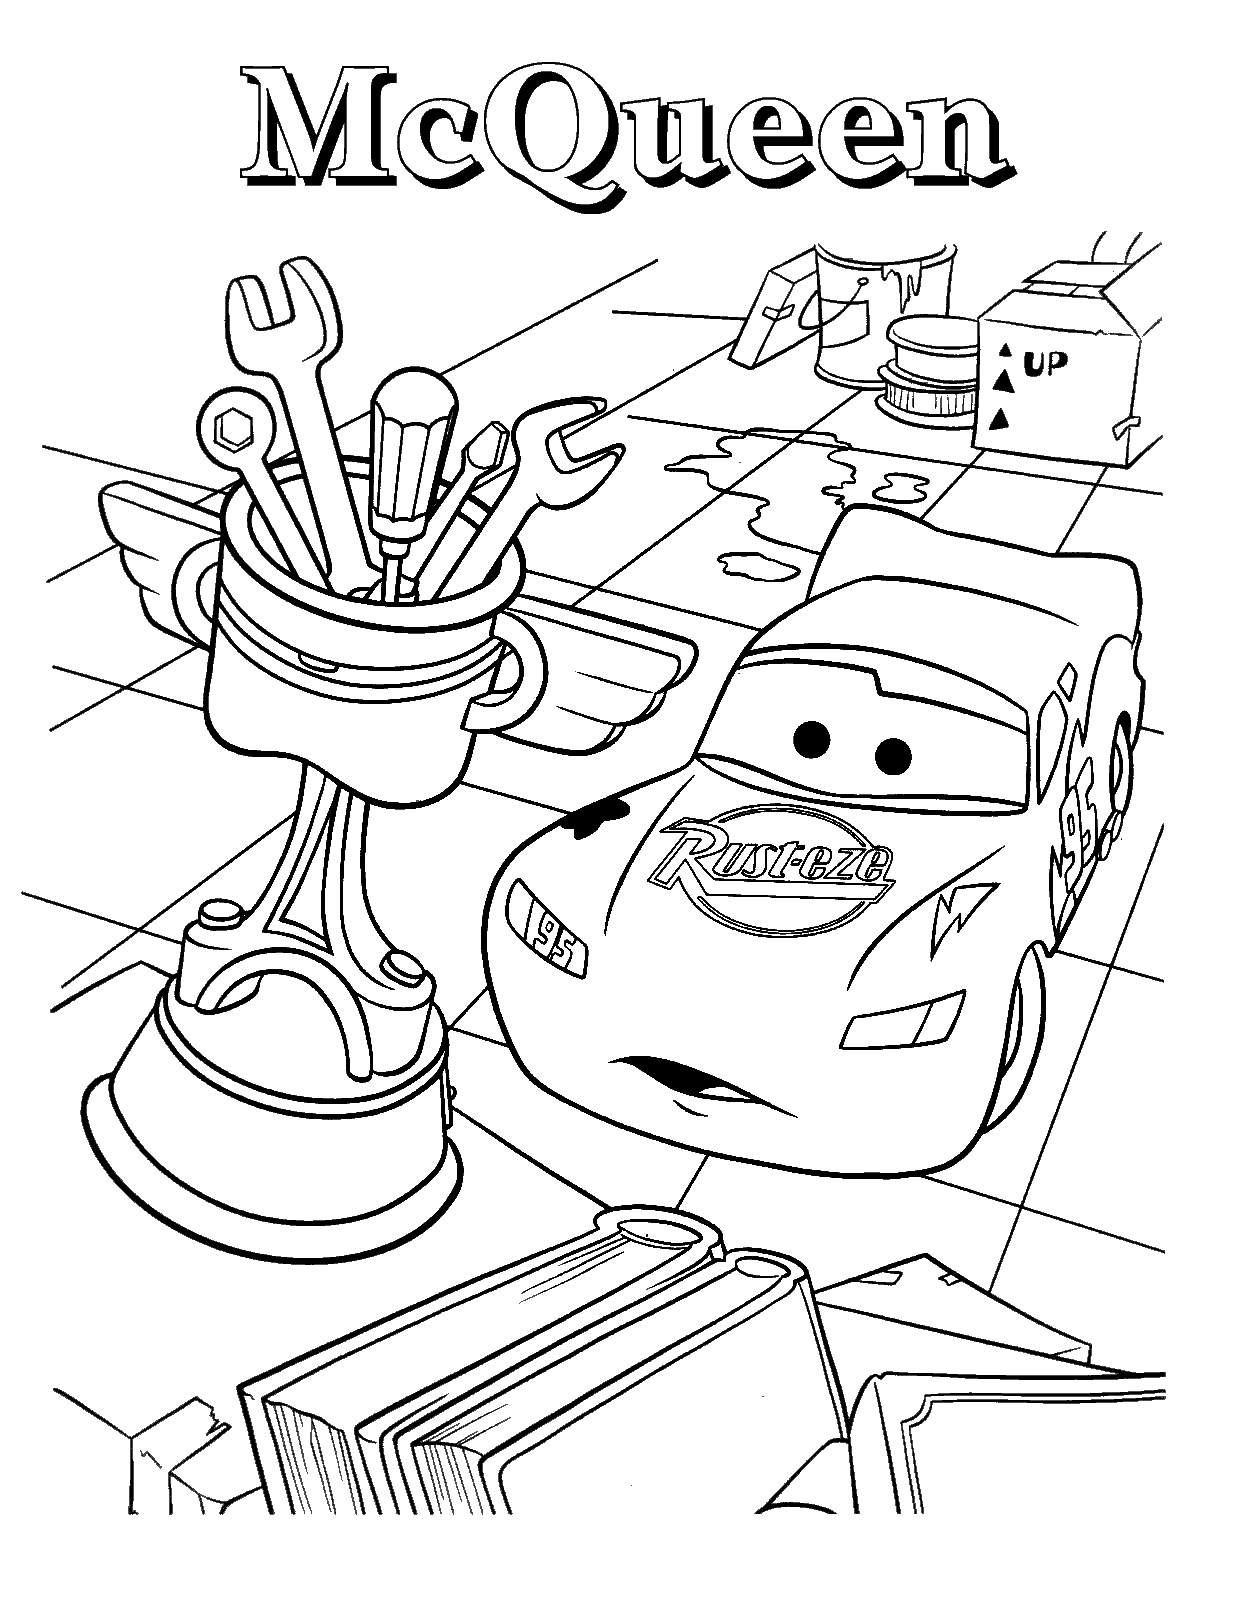 lightning mcqueen side view coloring page